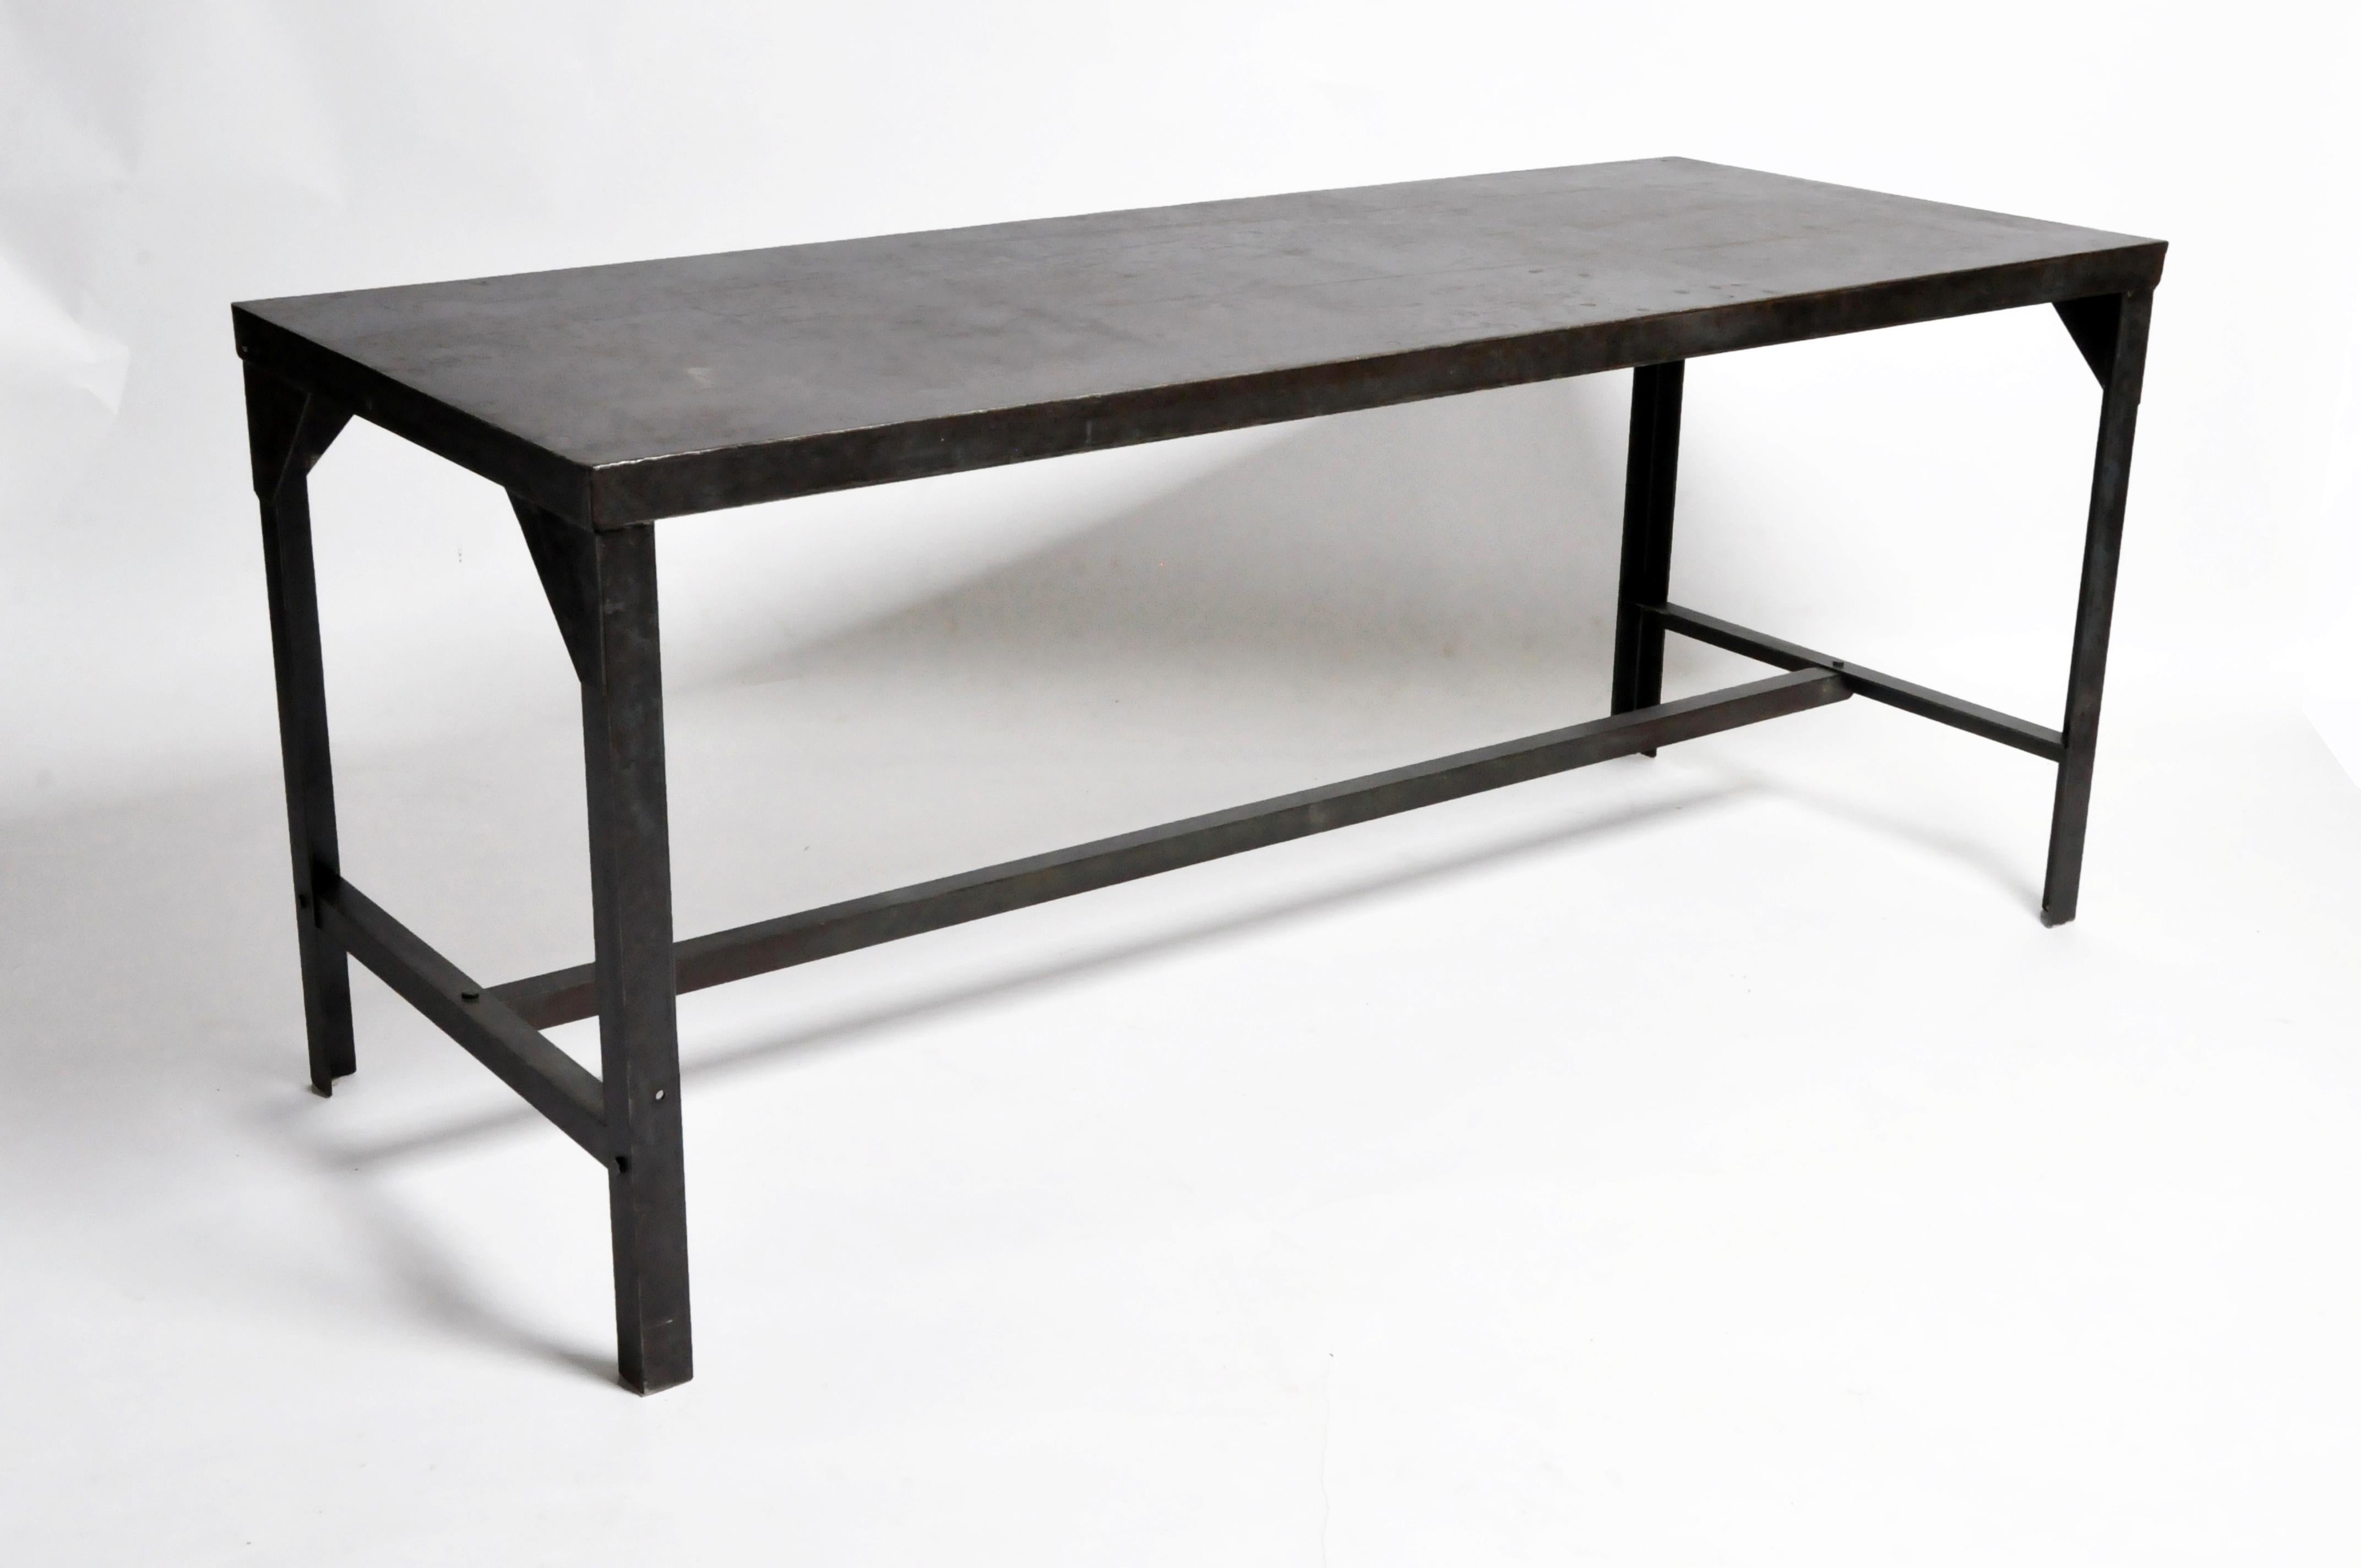 This impressive industrial welder's metal table is from France and was made circa 1960. Much of the original paint has been retained but the top has been cleaned and a sealer applied.